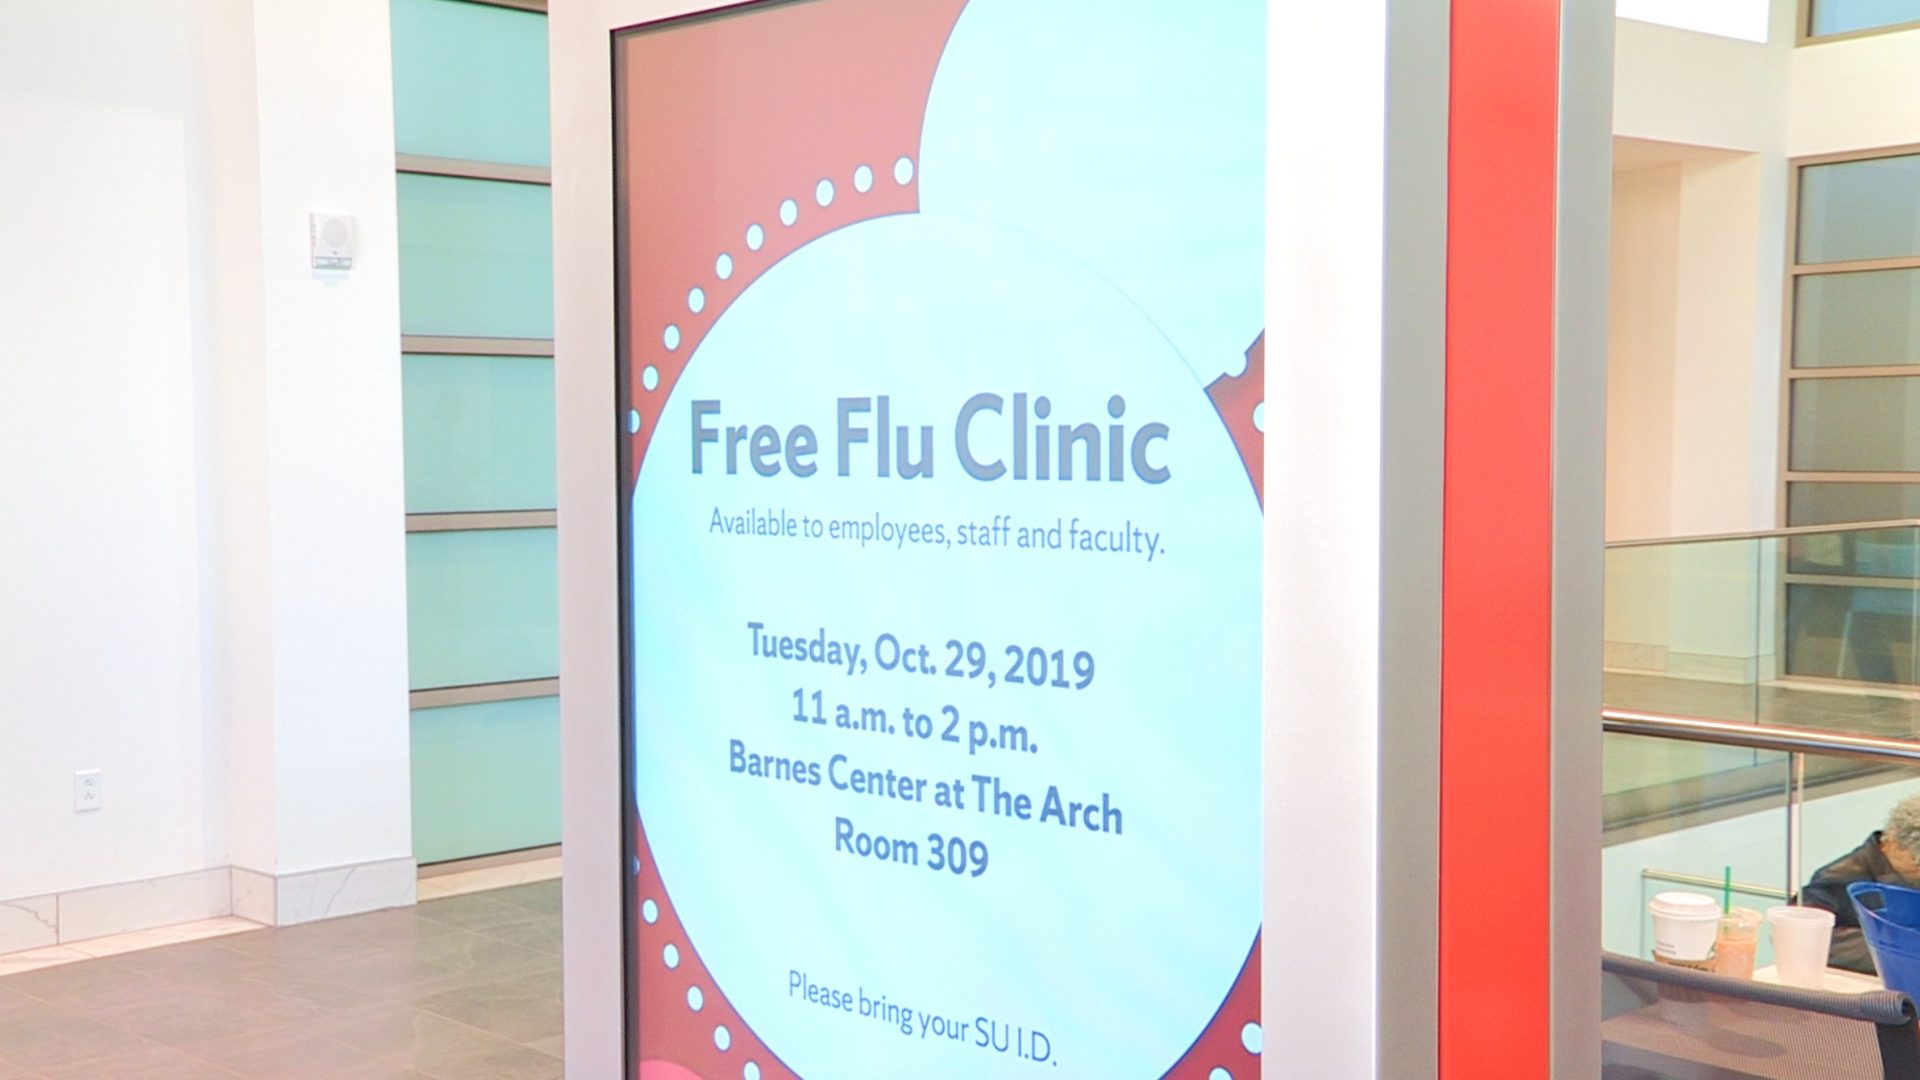 A sign at the Barnes Center promotes its free flu vaccine clinic.